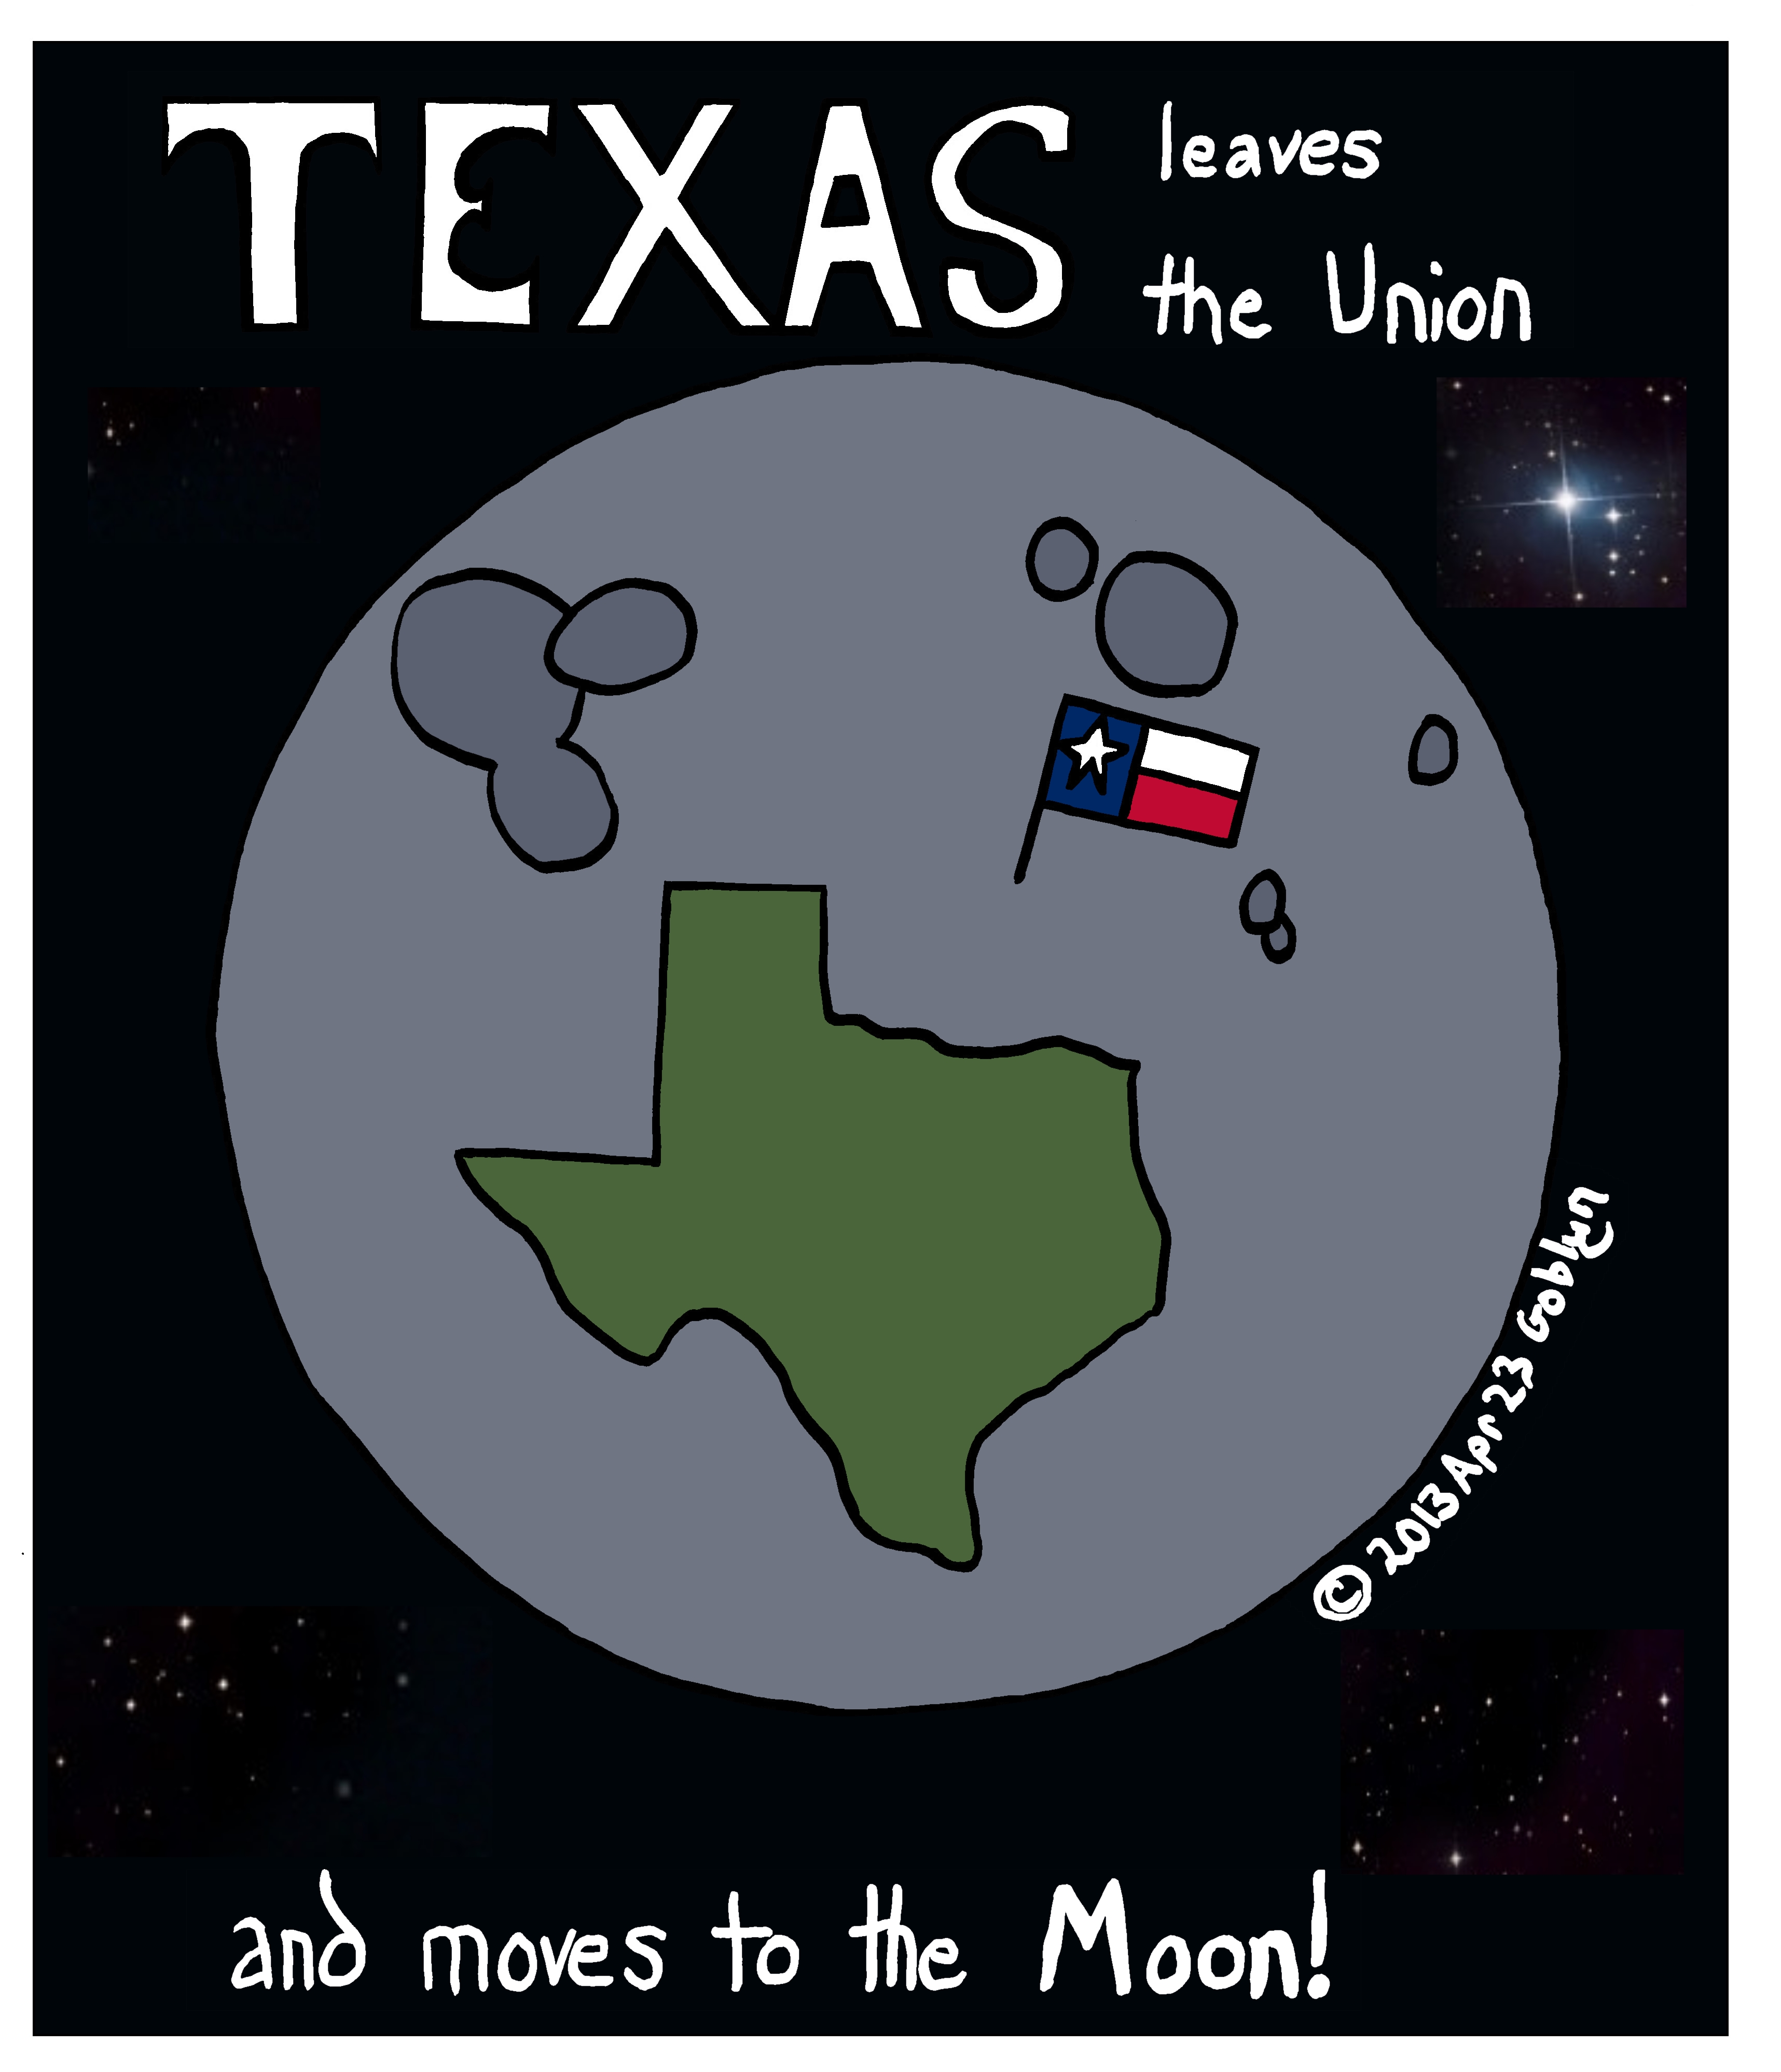 Texas leaves the Union and moves to the moon!